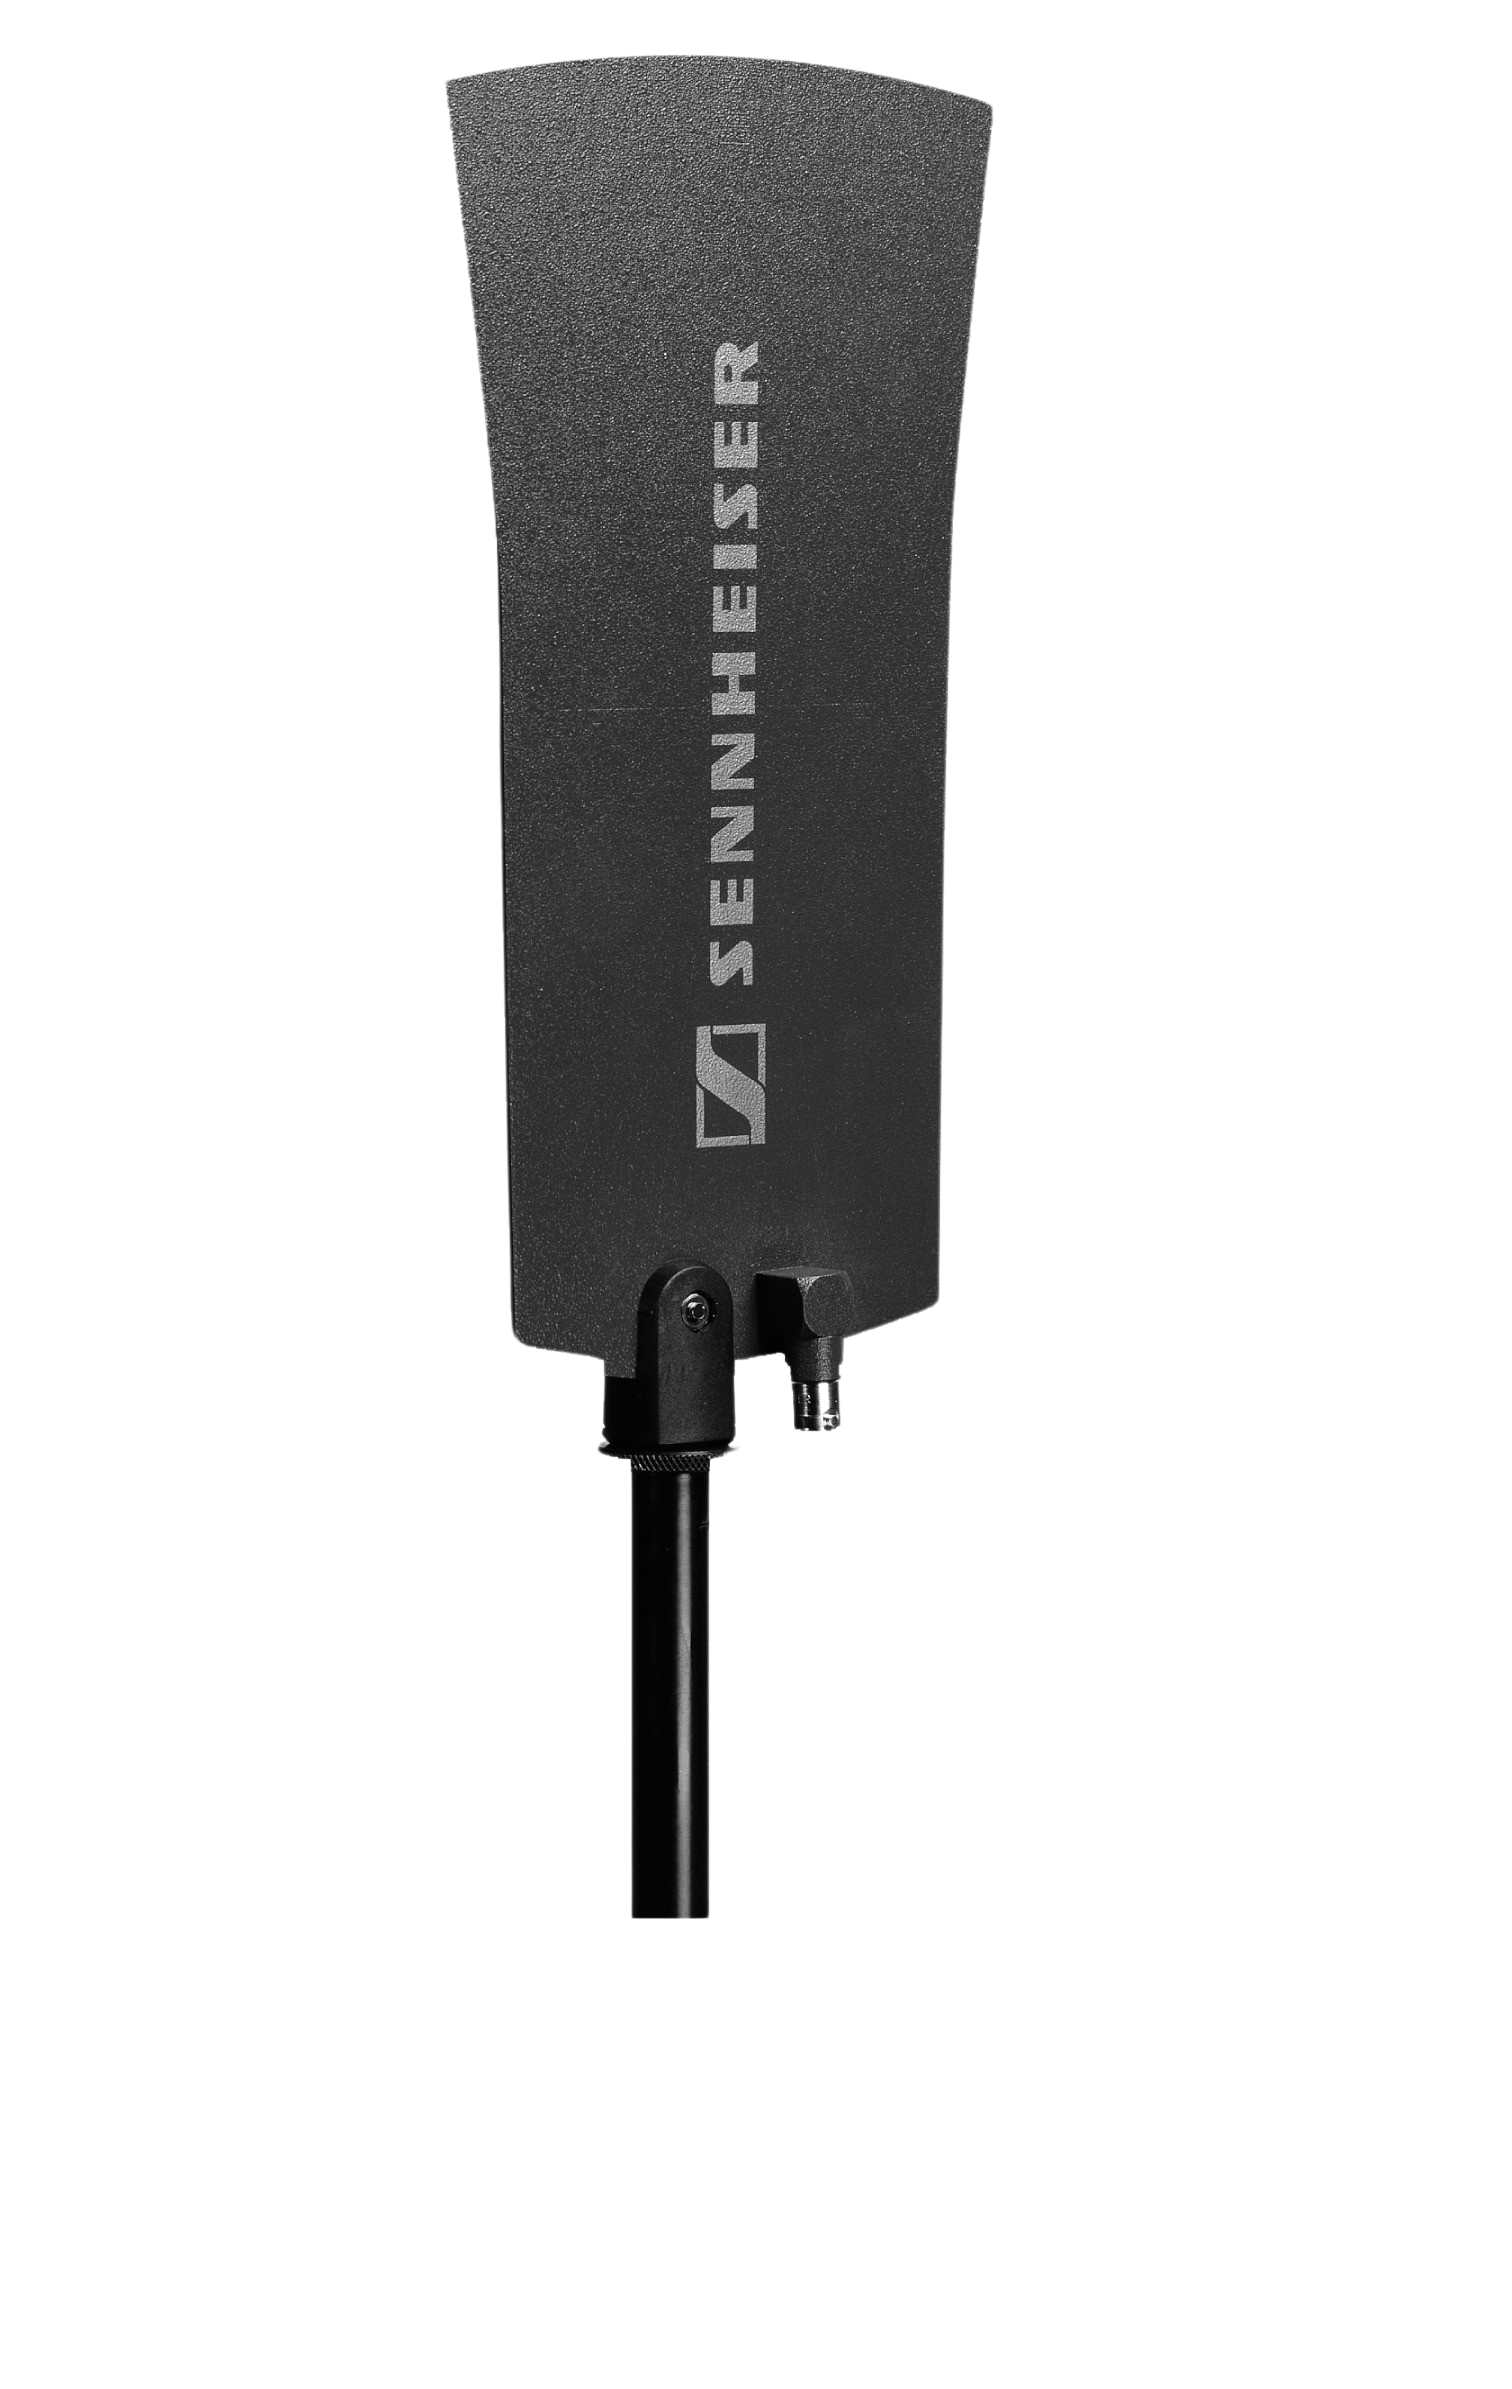 Dual transmitter for monitoring systems SR 2050 IEM